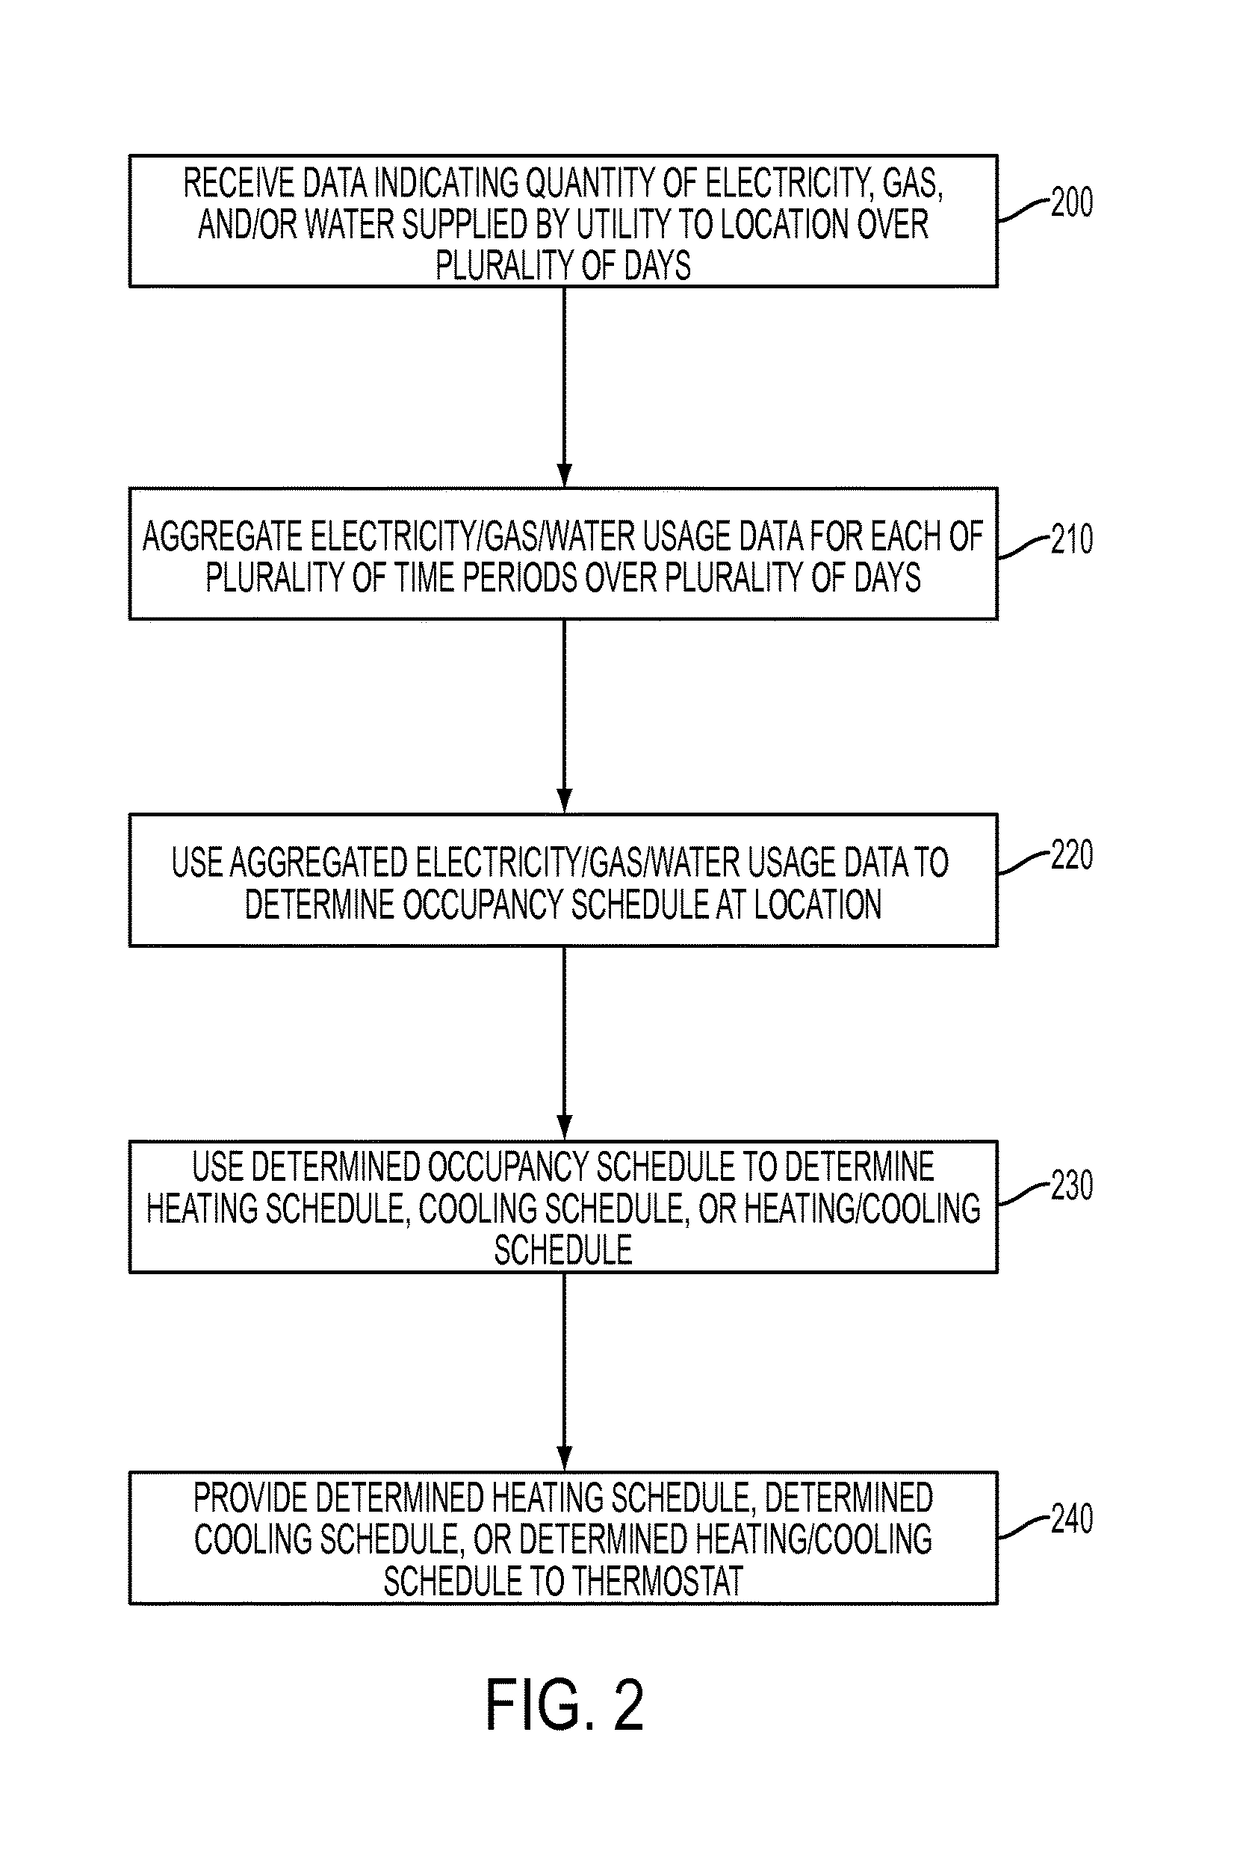 System and method for determining occupancy schedule for controlling a thermostat